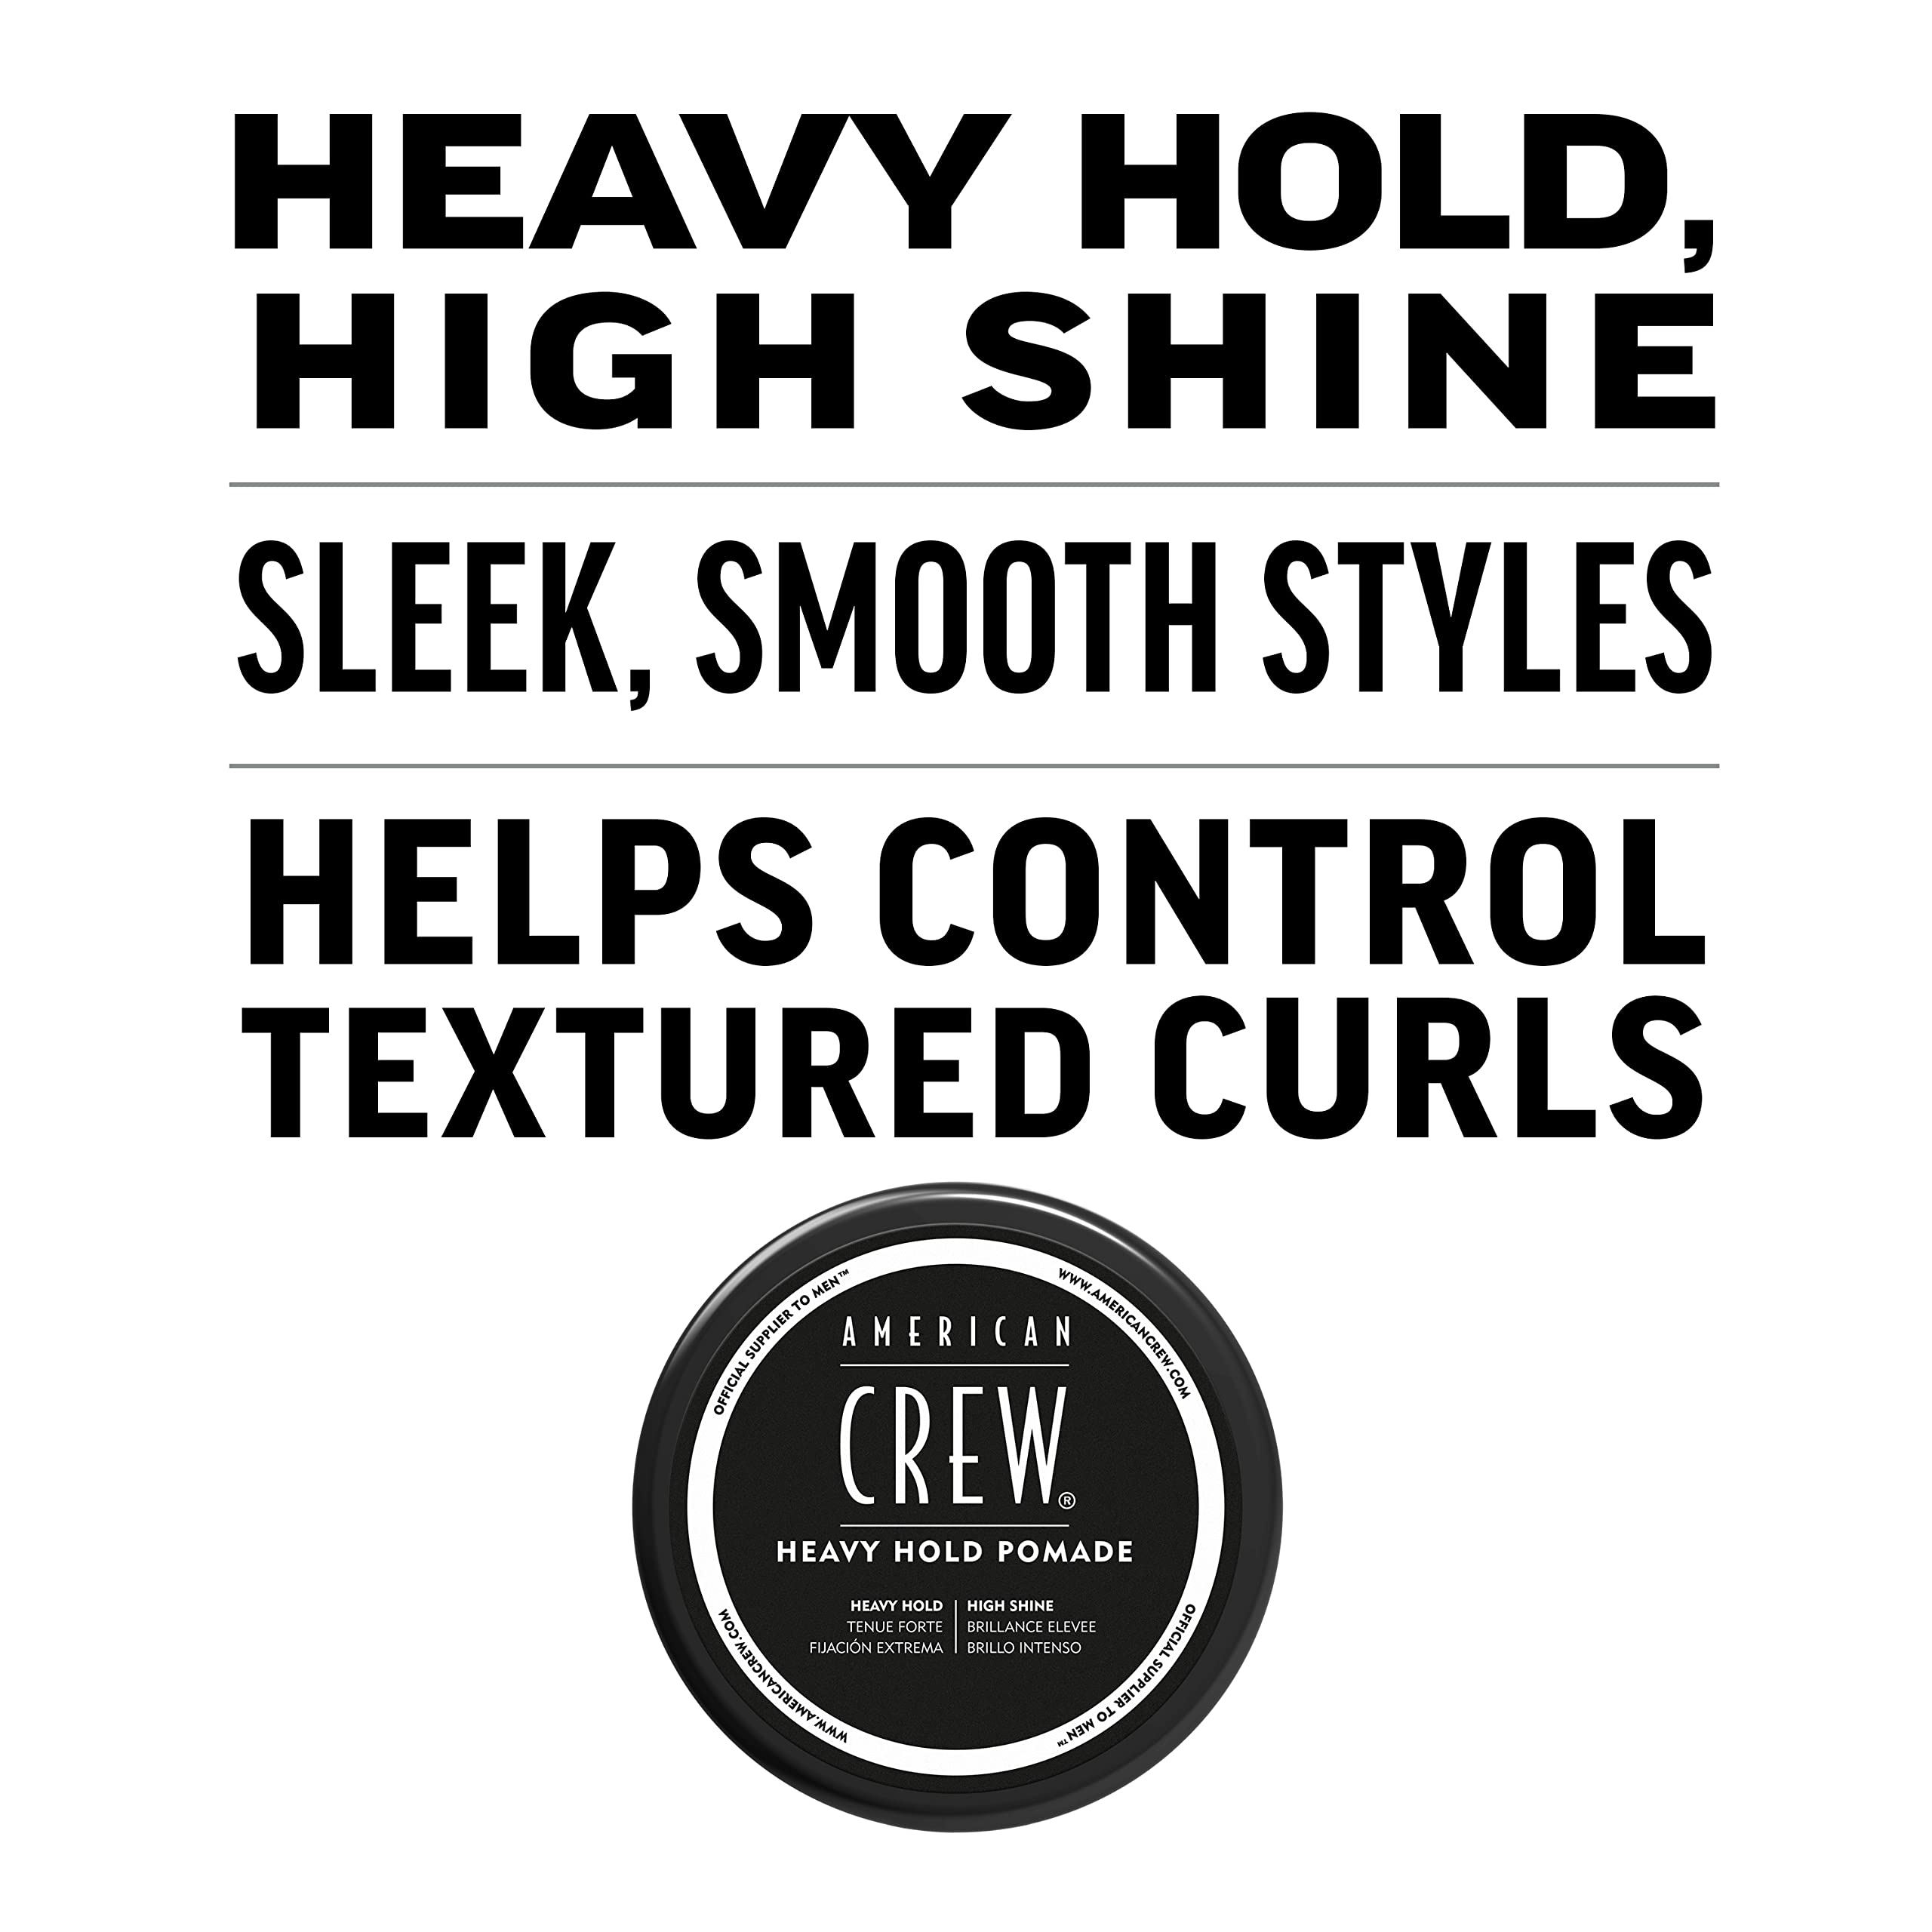 Men's Hair Pomade by American Crew (OLD VERSION), Like Hair Gel with Heavy Hold with High Shine, 3 Oz (Pack of 1)